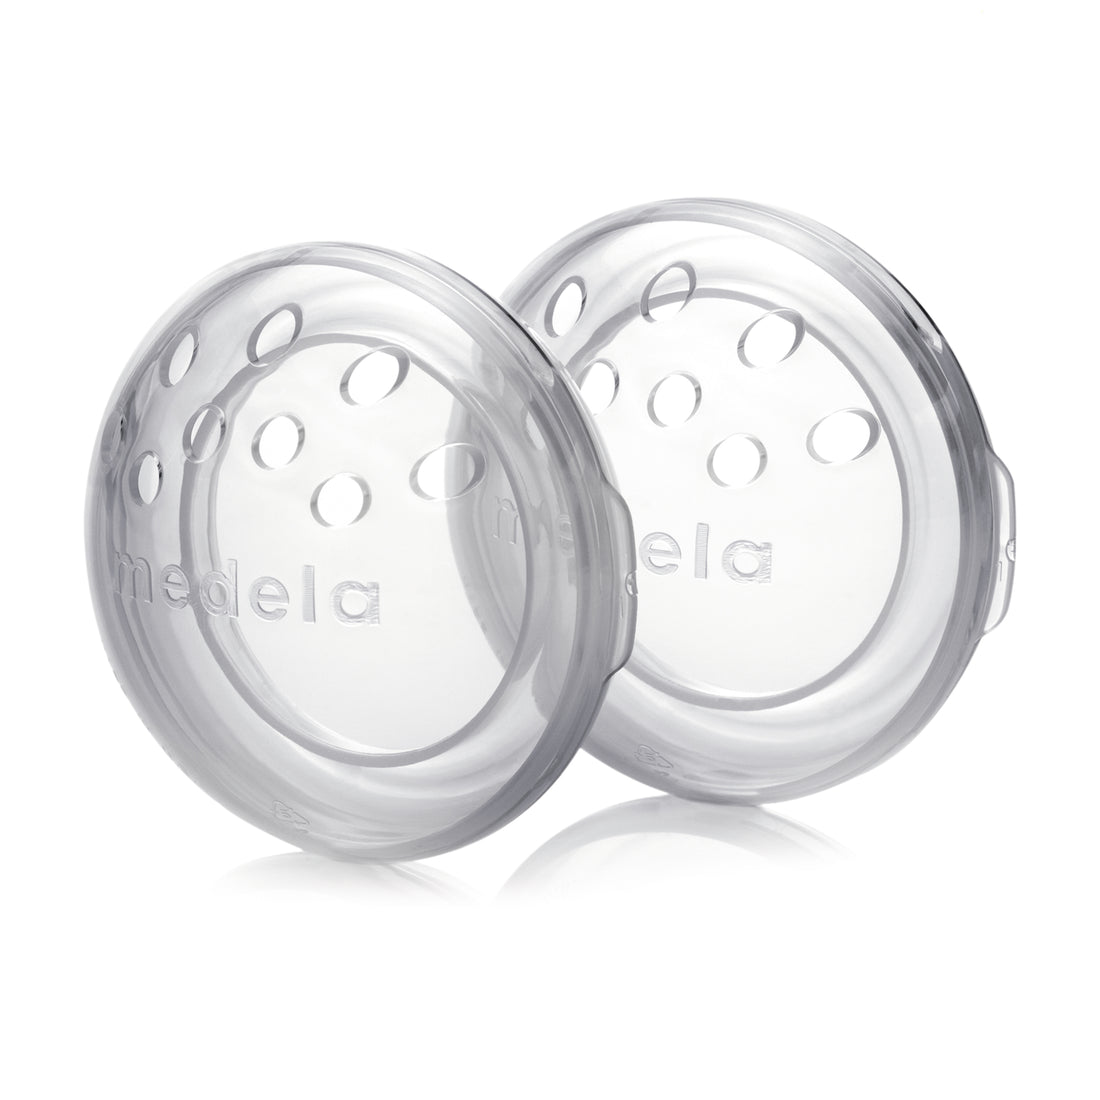 Medela TheraShells Breast Shells for Sore and Inverted Nipples